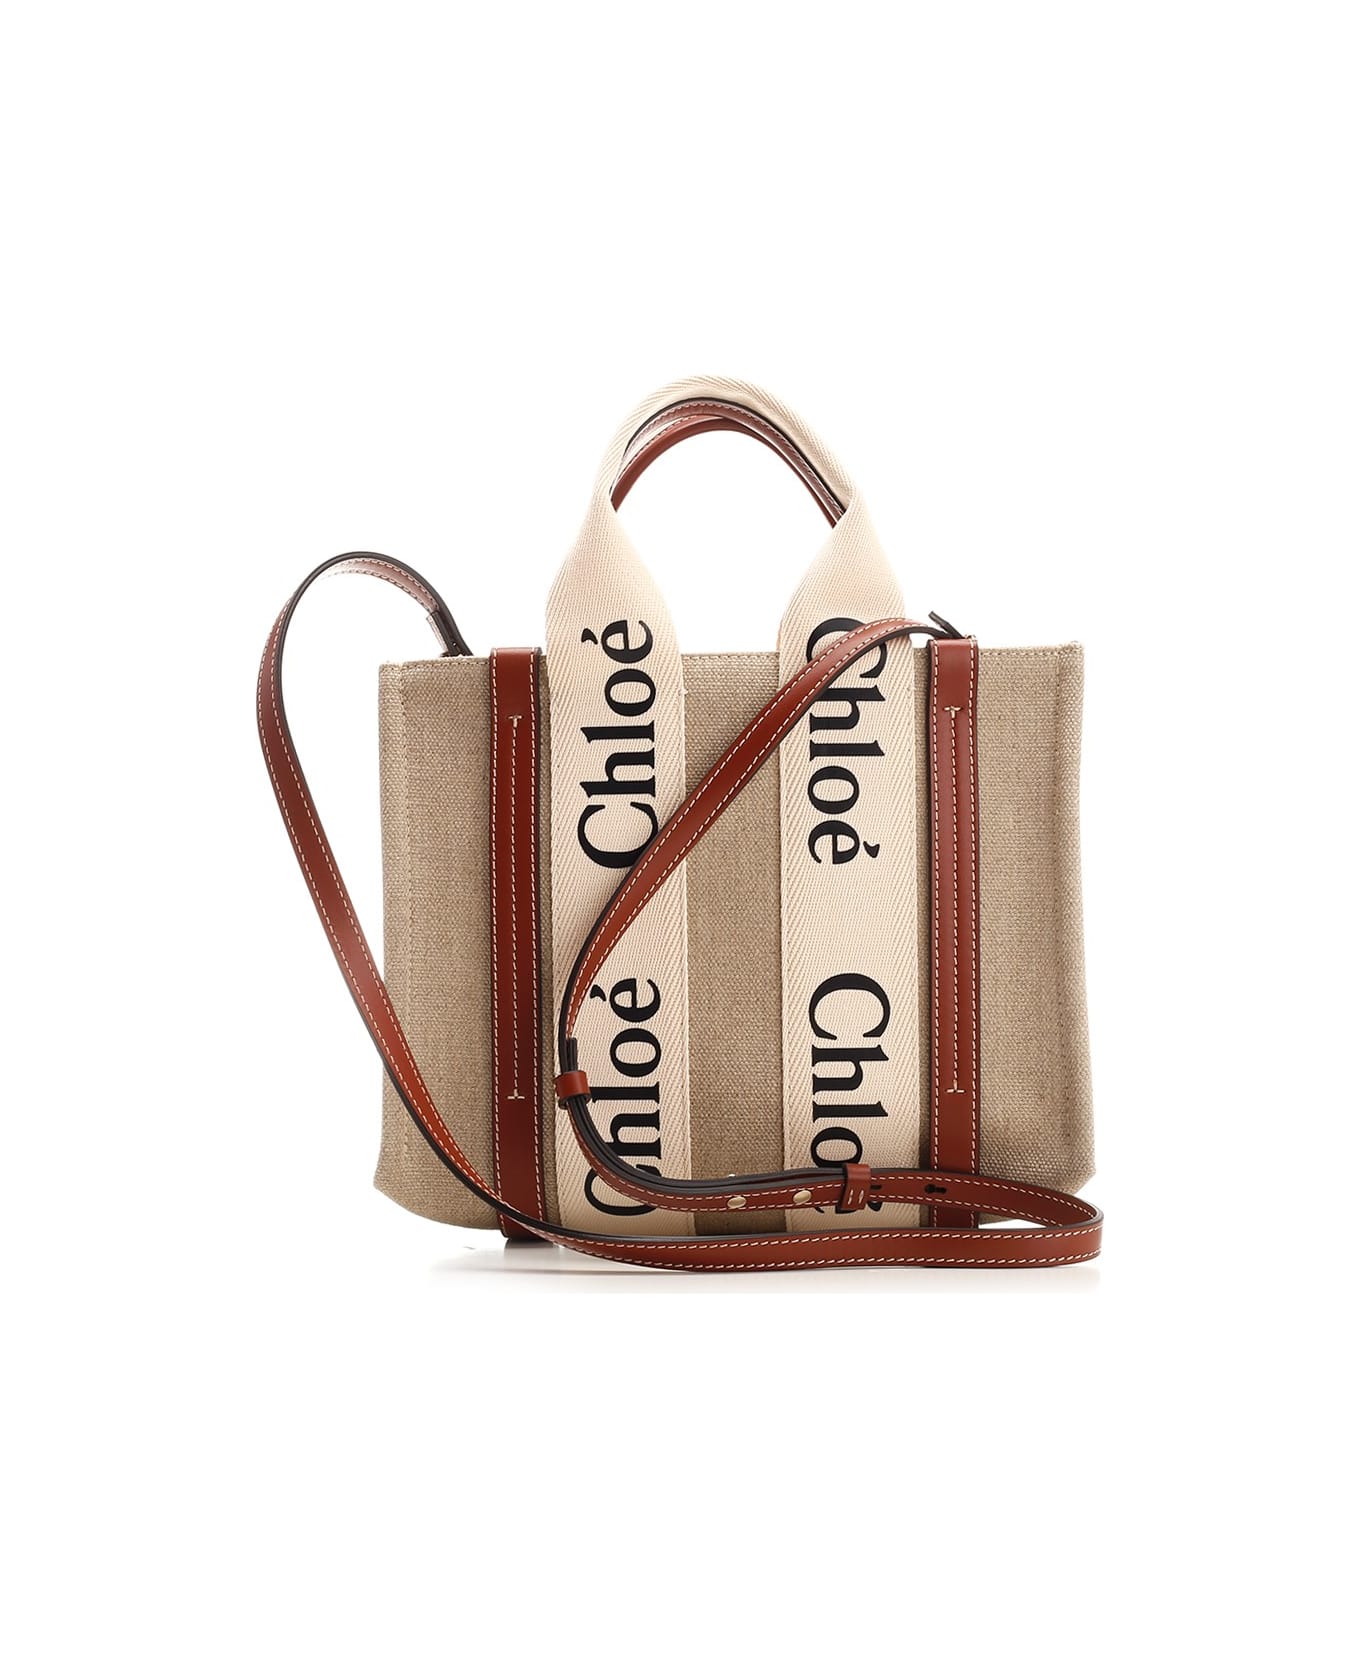 Chloé Small 'woody' Tote Bag - Brown トートバッグ